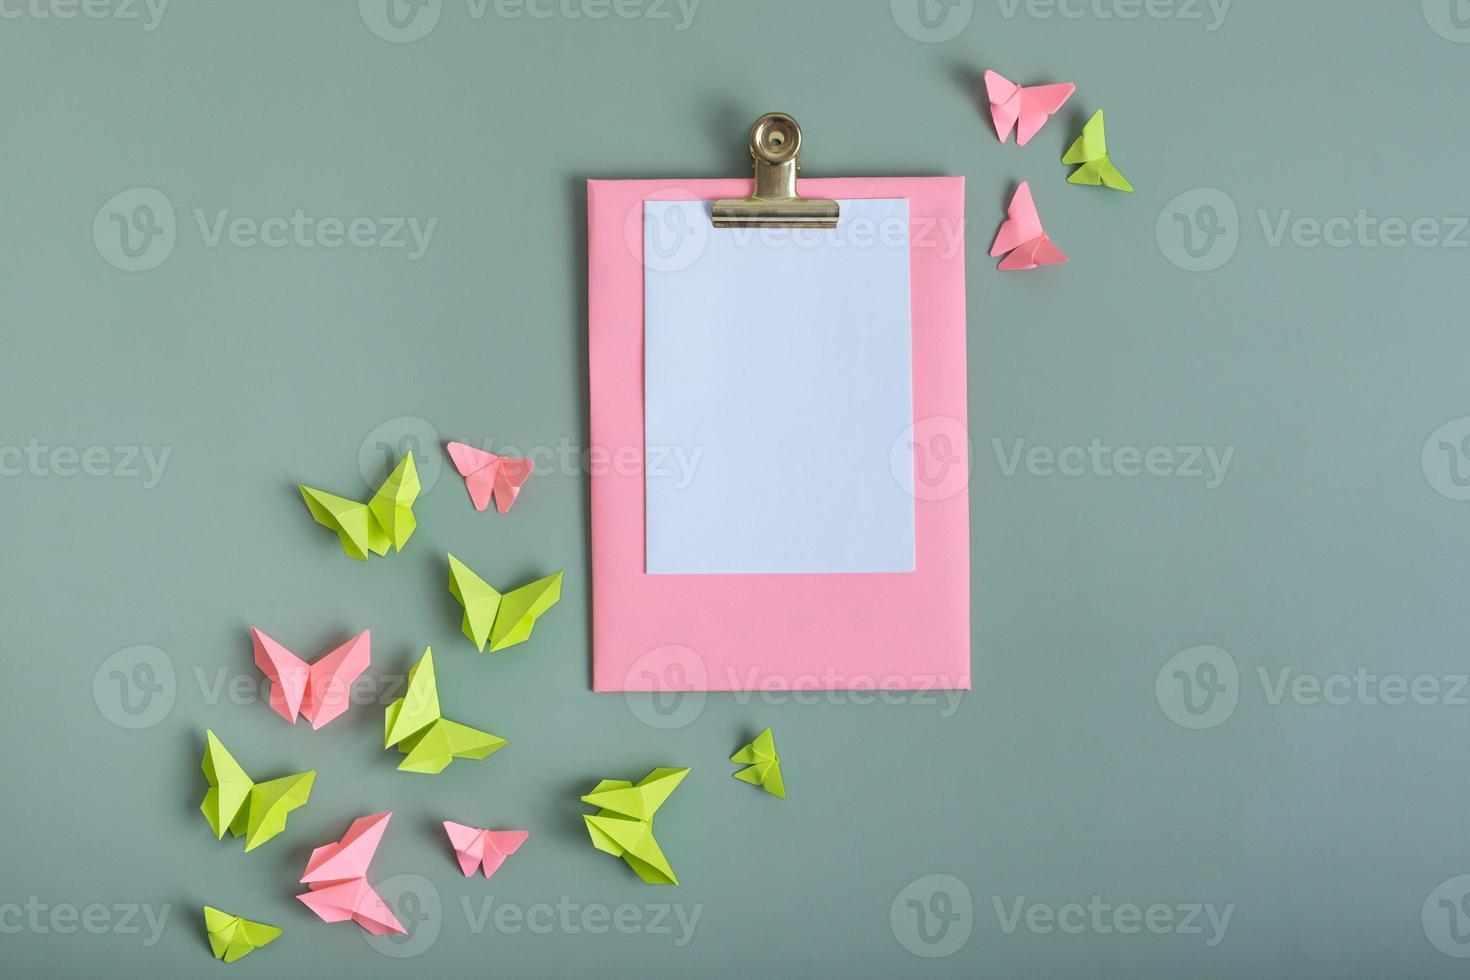 Massage board mockup with paper butterflies green and pink color flat lay on a colored background photo